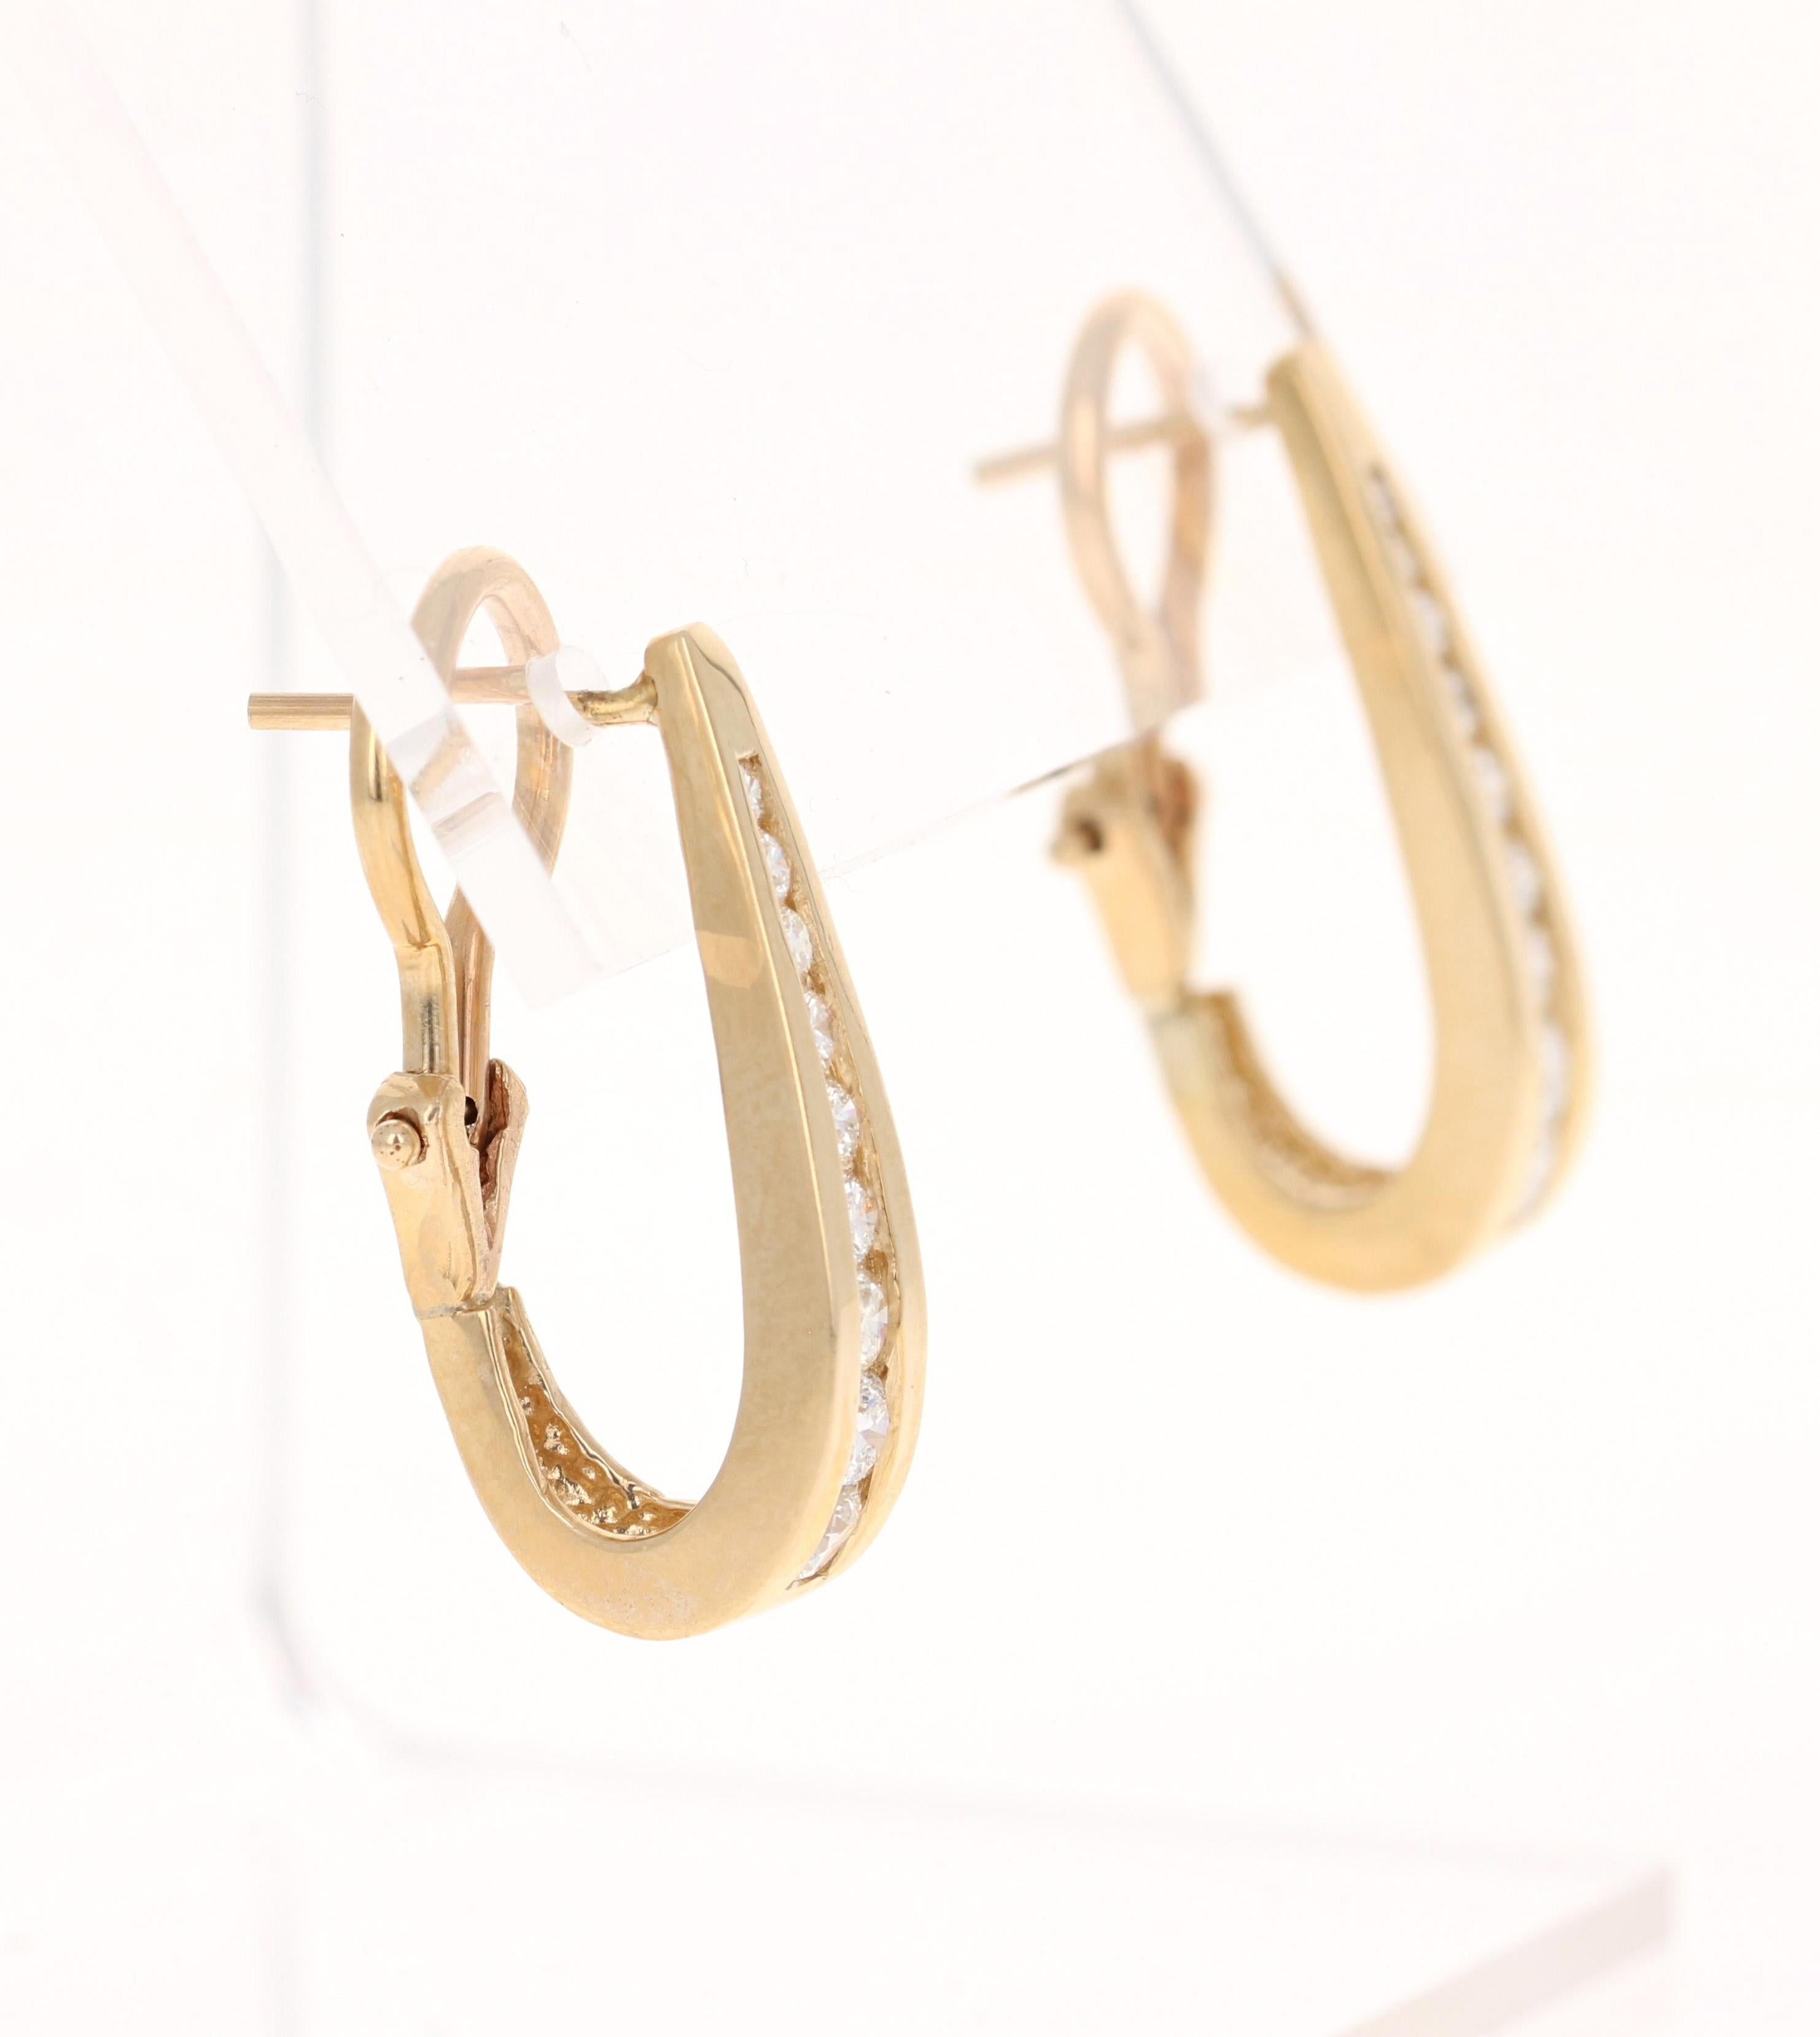 These beautiful hoop channel set earrings have 18 Round Cut Diamonds 0.85 Carats. (Clarity: VS, Color: H)

The hoops are set in 14 Karat Yellow Gold and weigh approximately 6.6 grams. They are approximately 0.75 inches long. 

